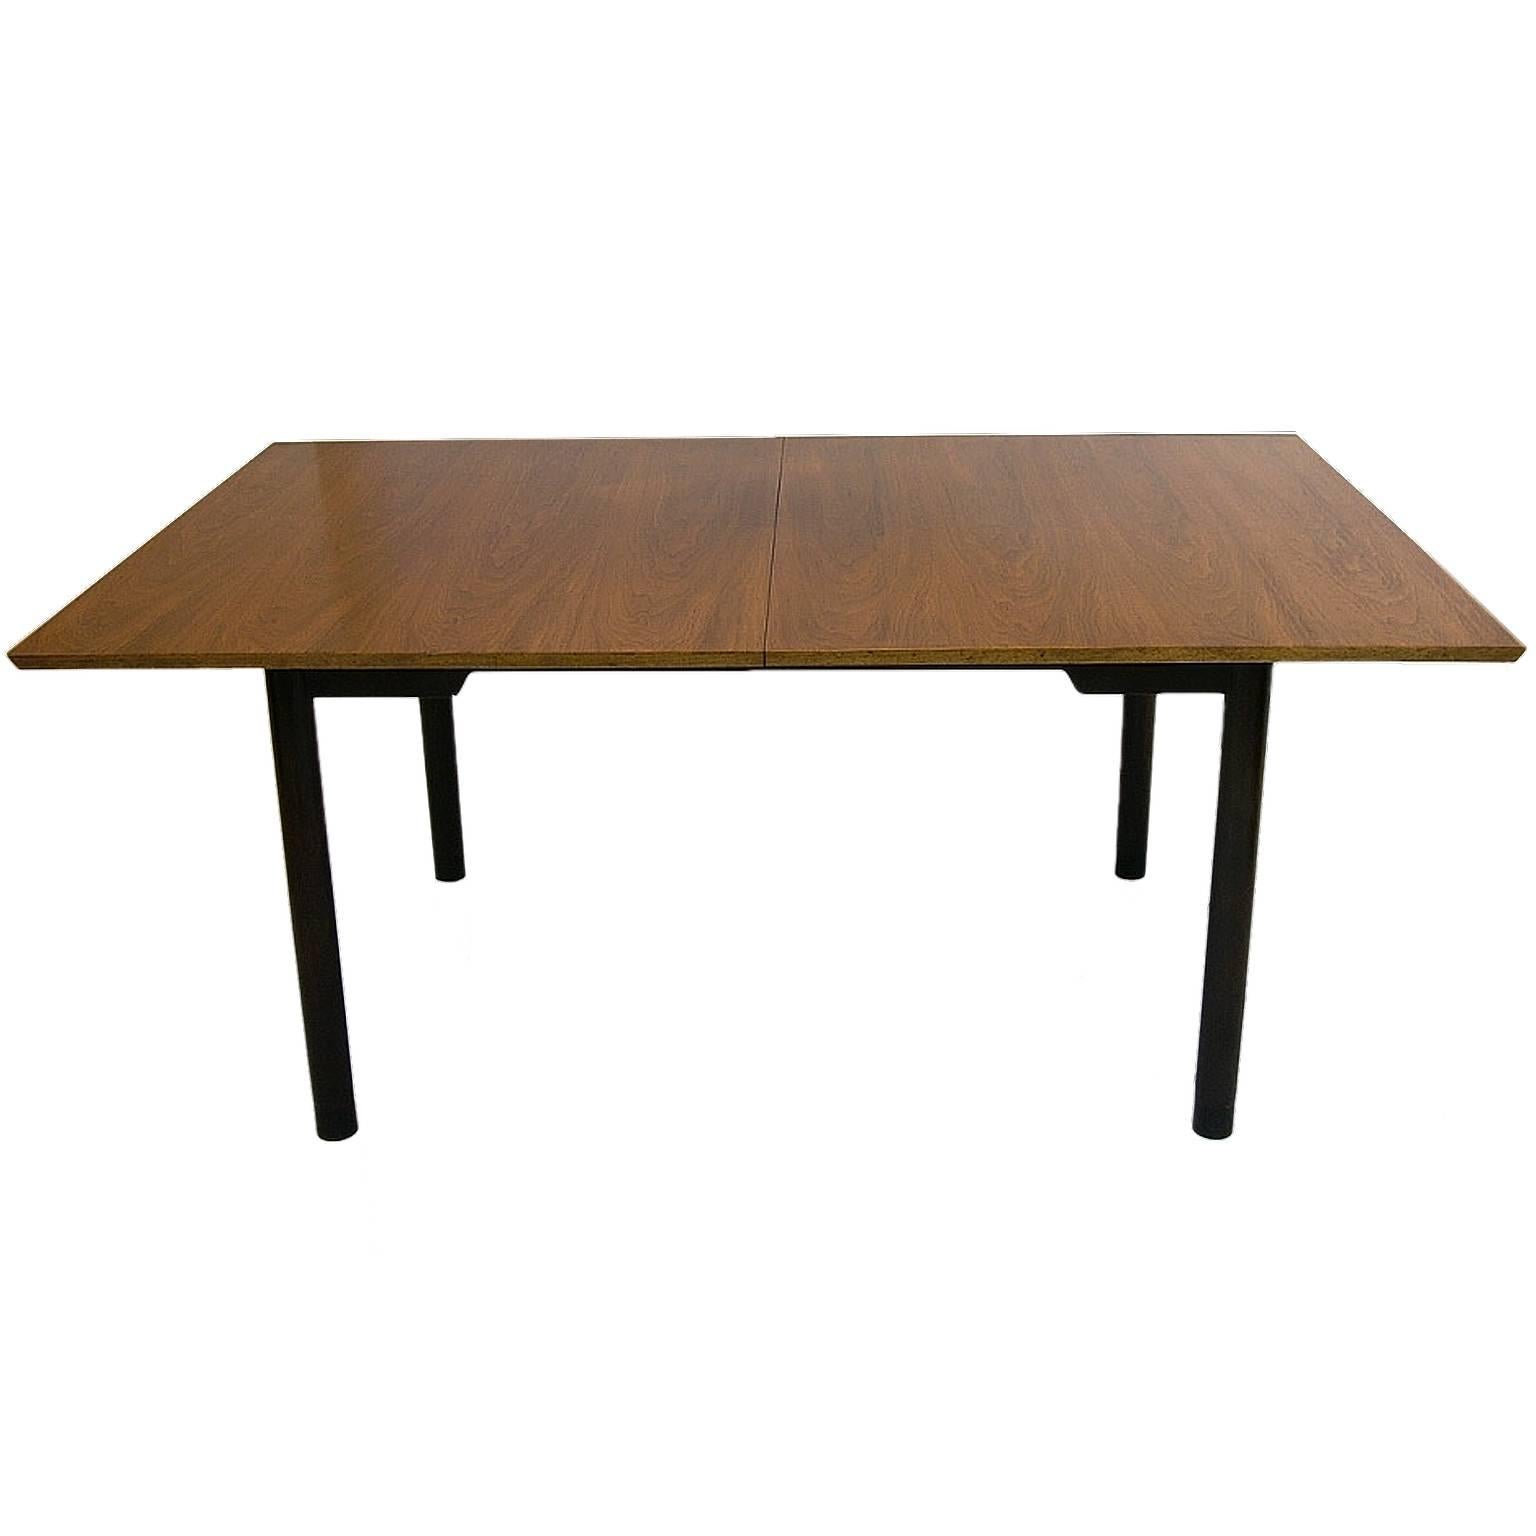 Sleek walnut extension dining table with deep mahogany base and legs. Each leg is wrapped with a stunning leather detail at the base of each leg. Table comes with two extension leaves each measuring 15